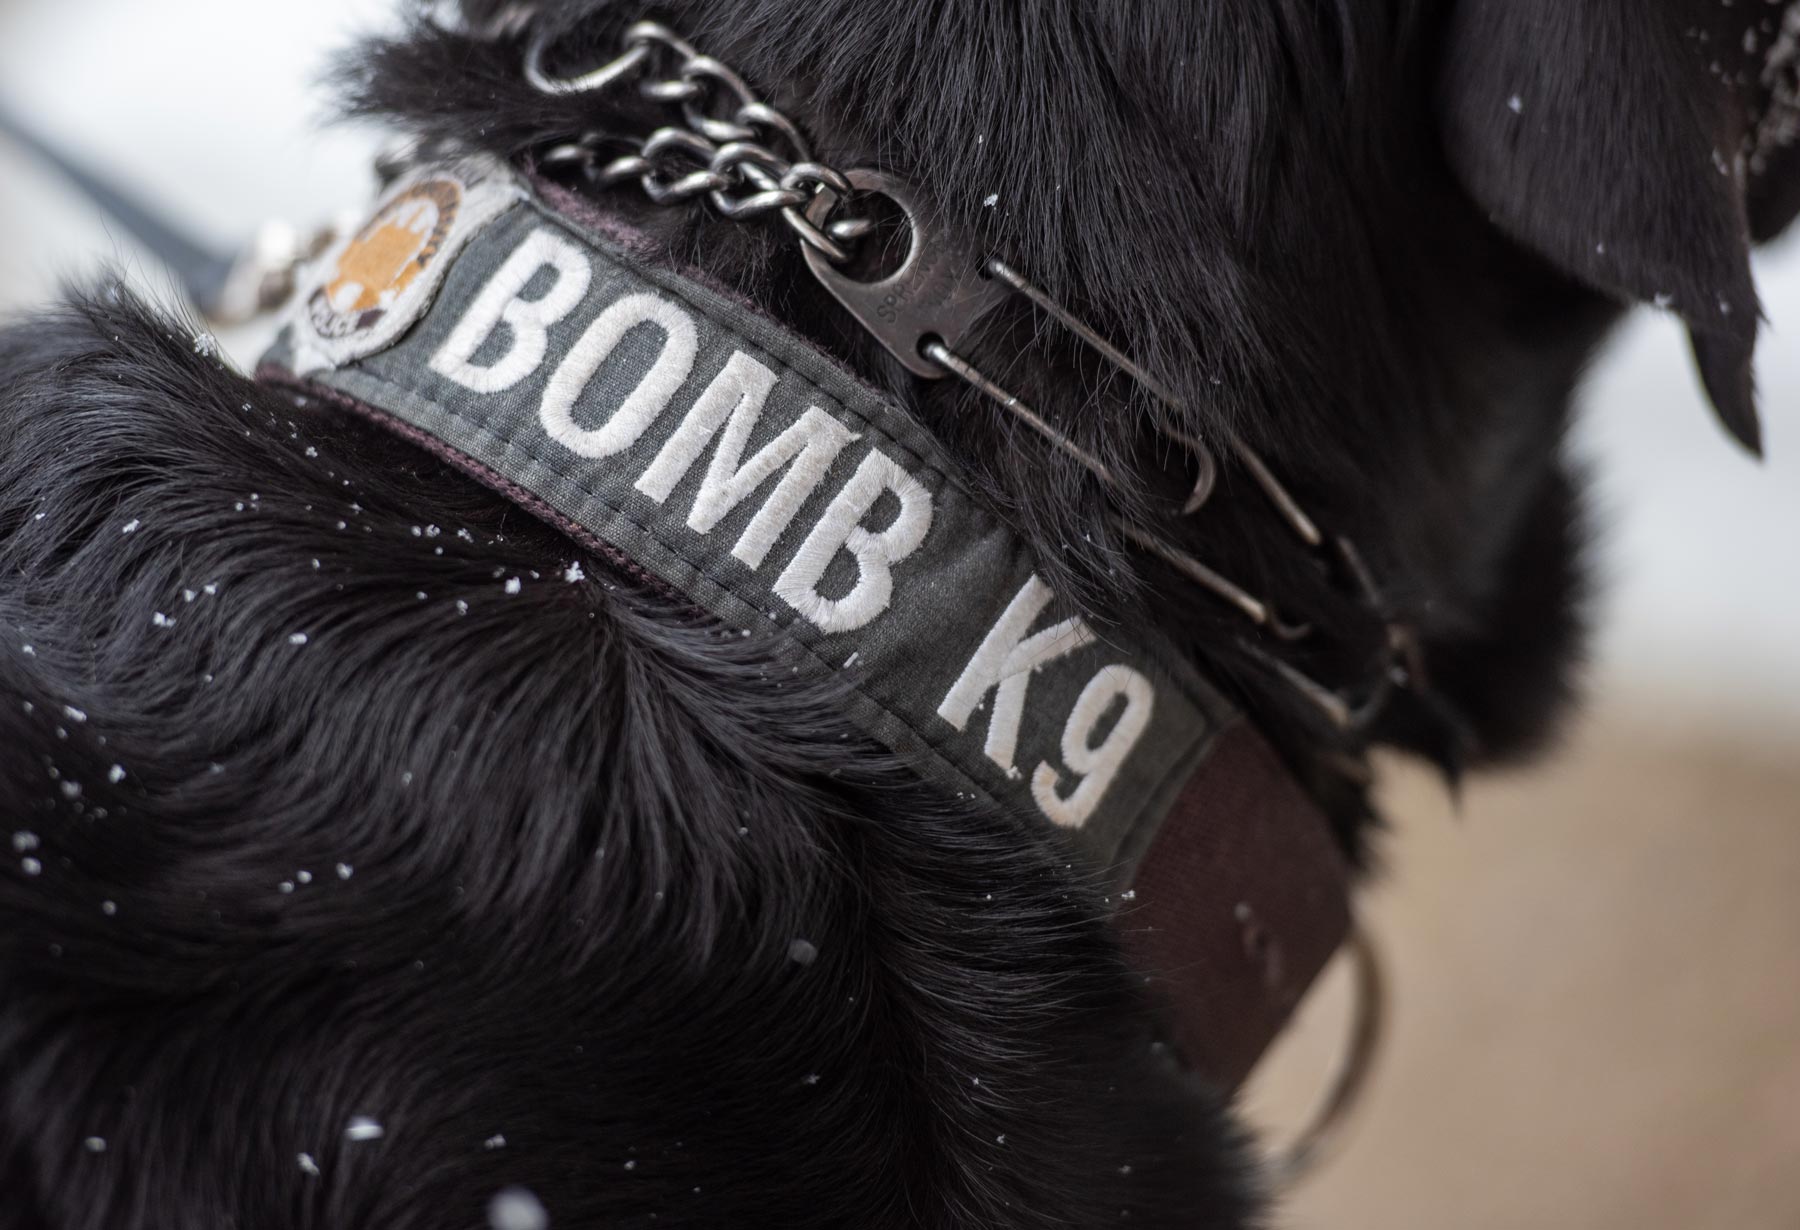 A close-up of the OUPD bomb dog collar